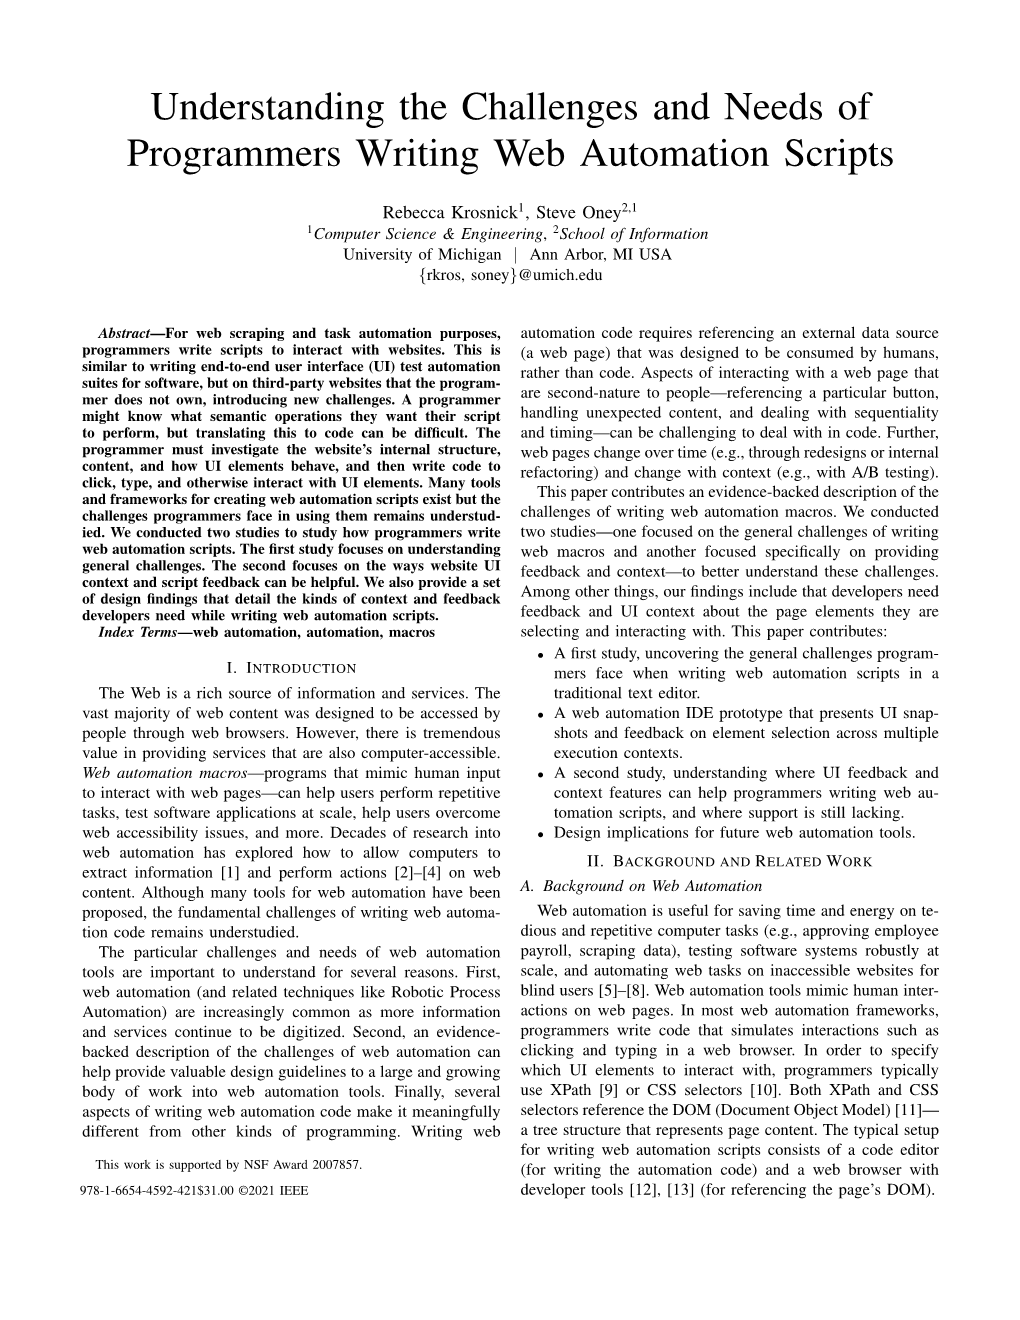 Understanding the Challenges and Needs of Programmers Writing Web Automation Scripts